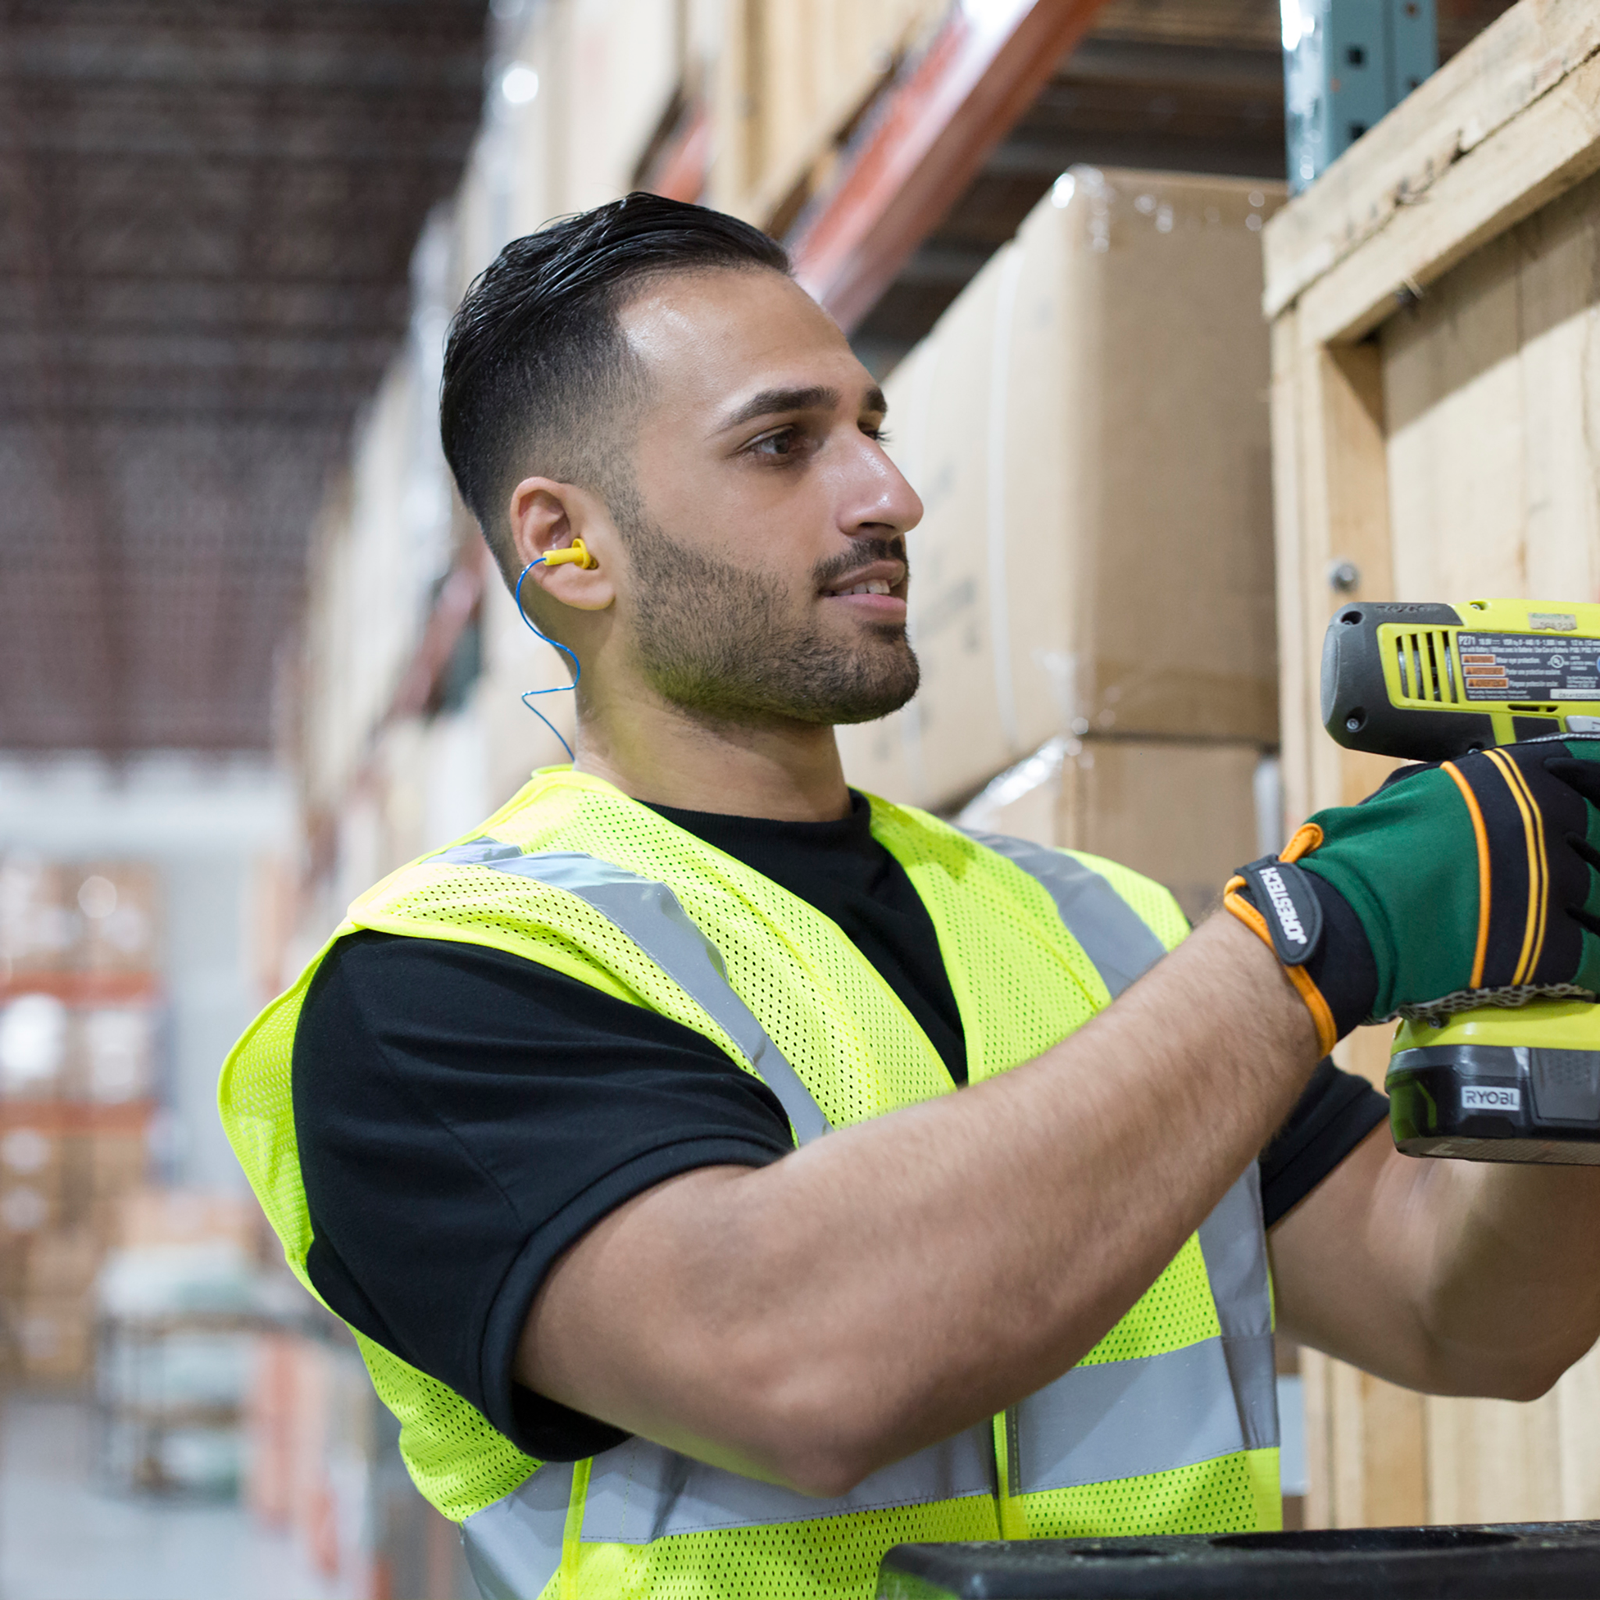 Man working wearing silicon corded earplugs for noise reduction while operating a loud power tool in a warehouse